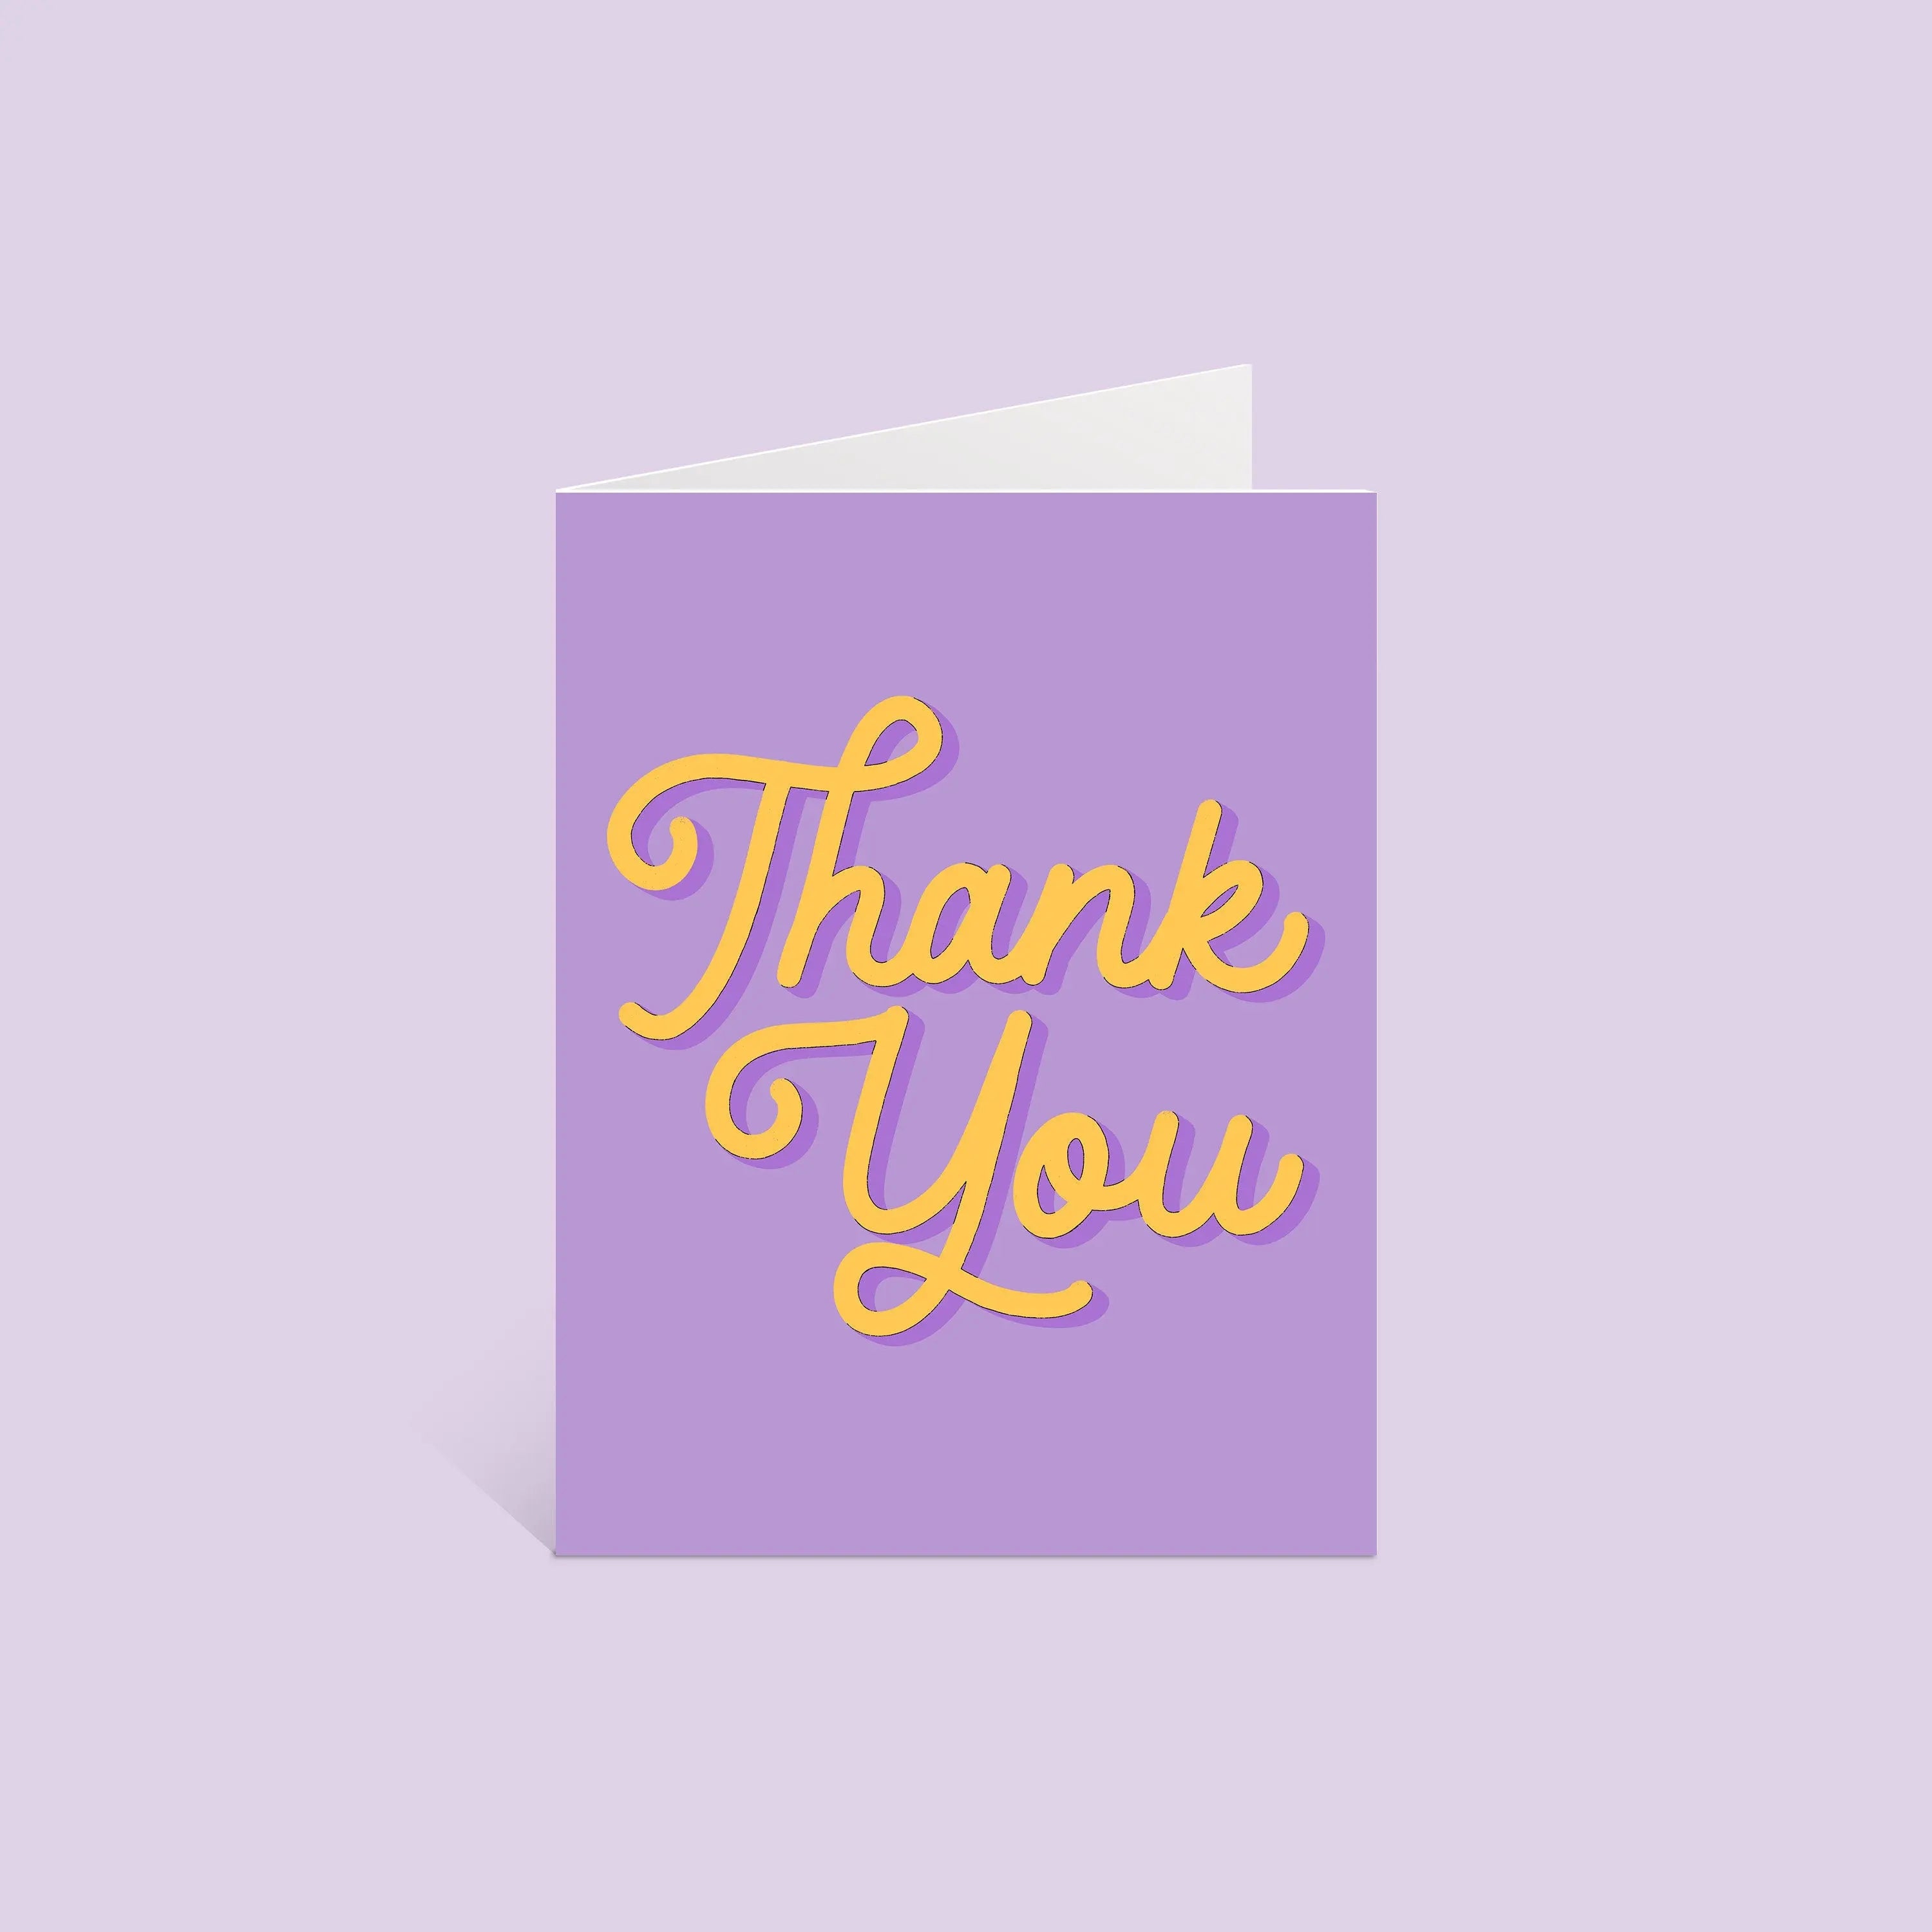 Thank You card - yellow and purple MangoIllustrated